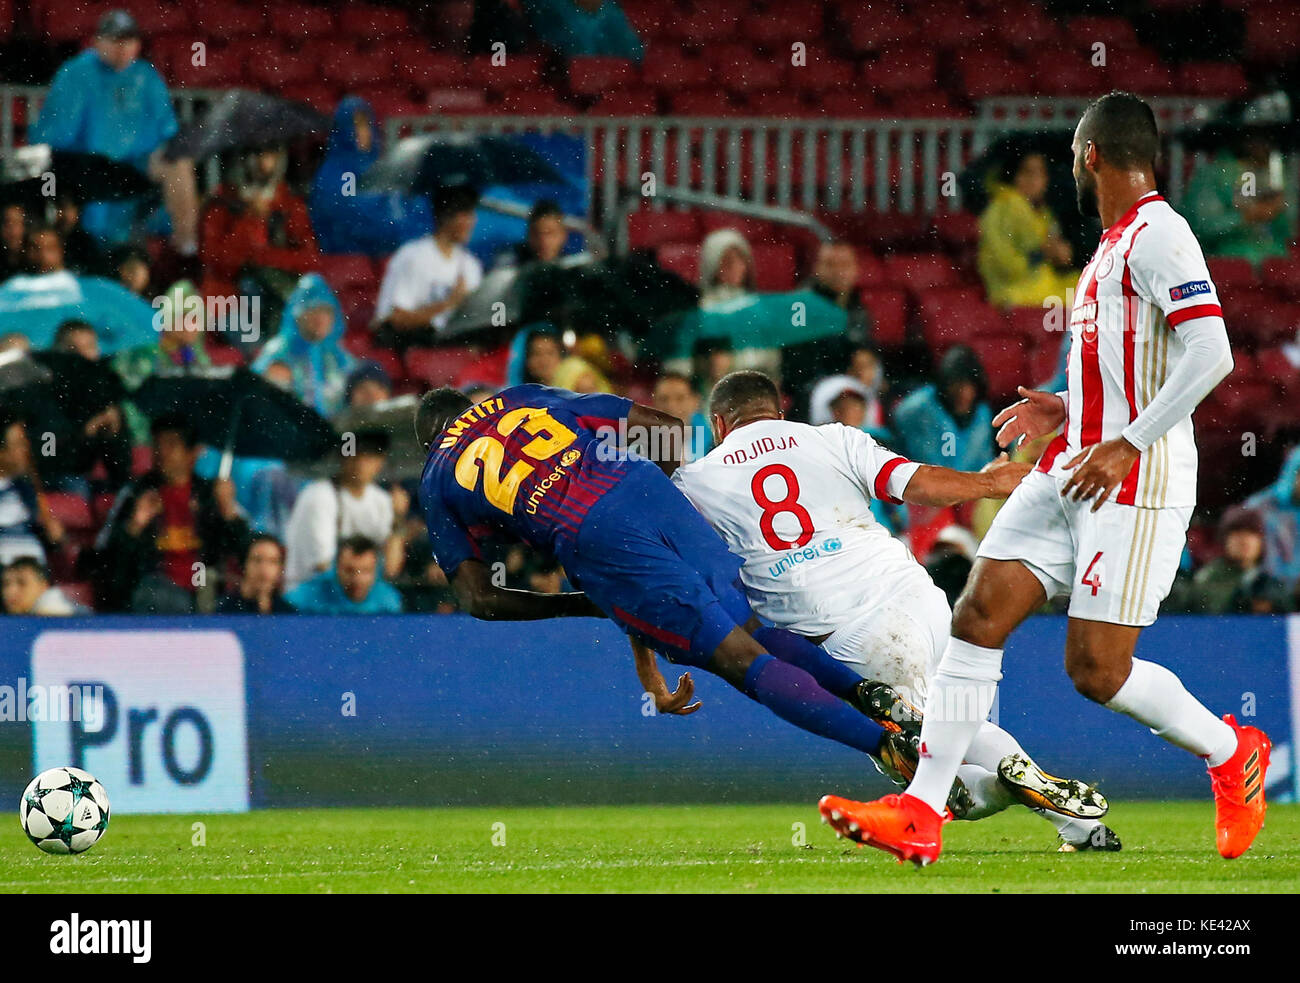 Barcelona, Spain. 18th Oct, 2017. Vadis Odjidja-Ofoe and Samuel Umtiti during the match between FC Barcelona v Olympiakos, corresponding to the Champions League, on october 18, 2017. Credit: Gtres Información más Comuniación on line, S.L./Alamy Live News Stock Photo